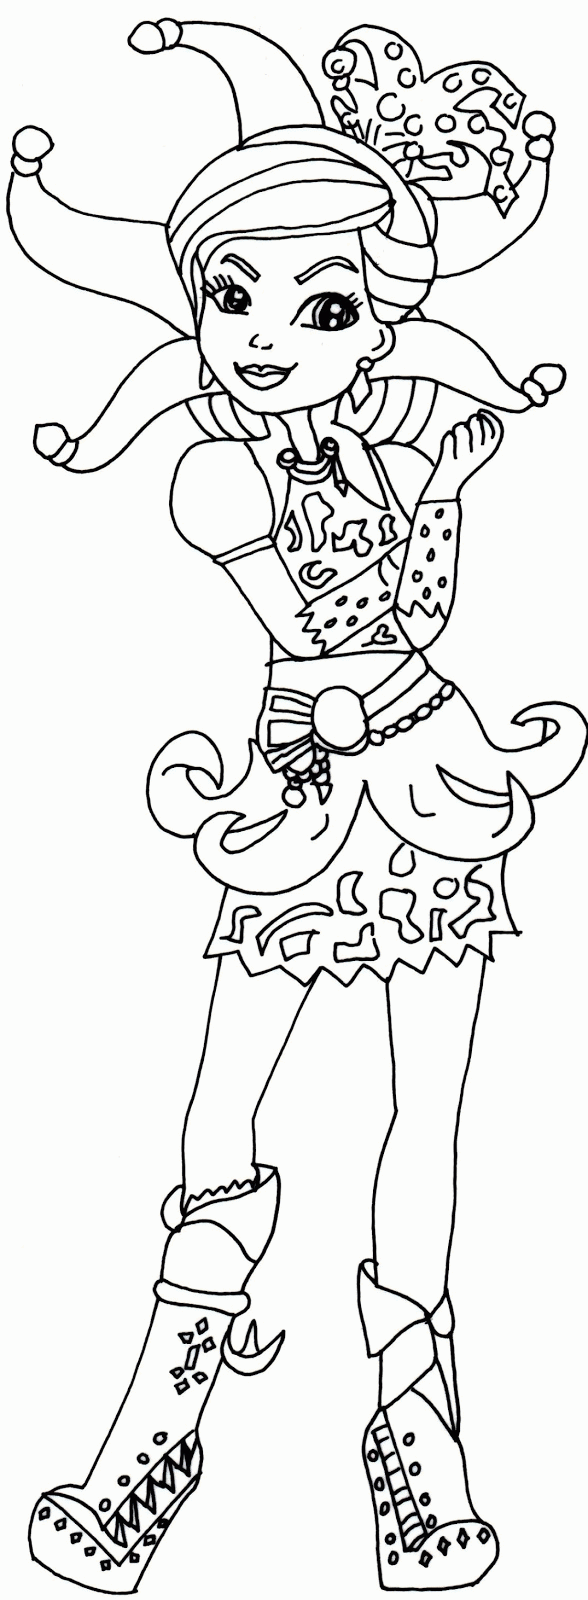 Free Printable Ever After High Coloring Pages: Courtly Jester Ever ...